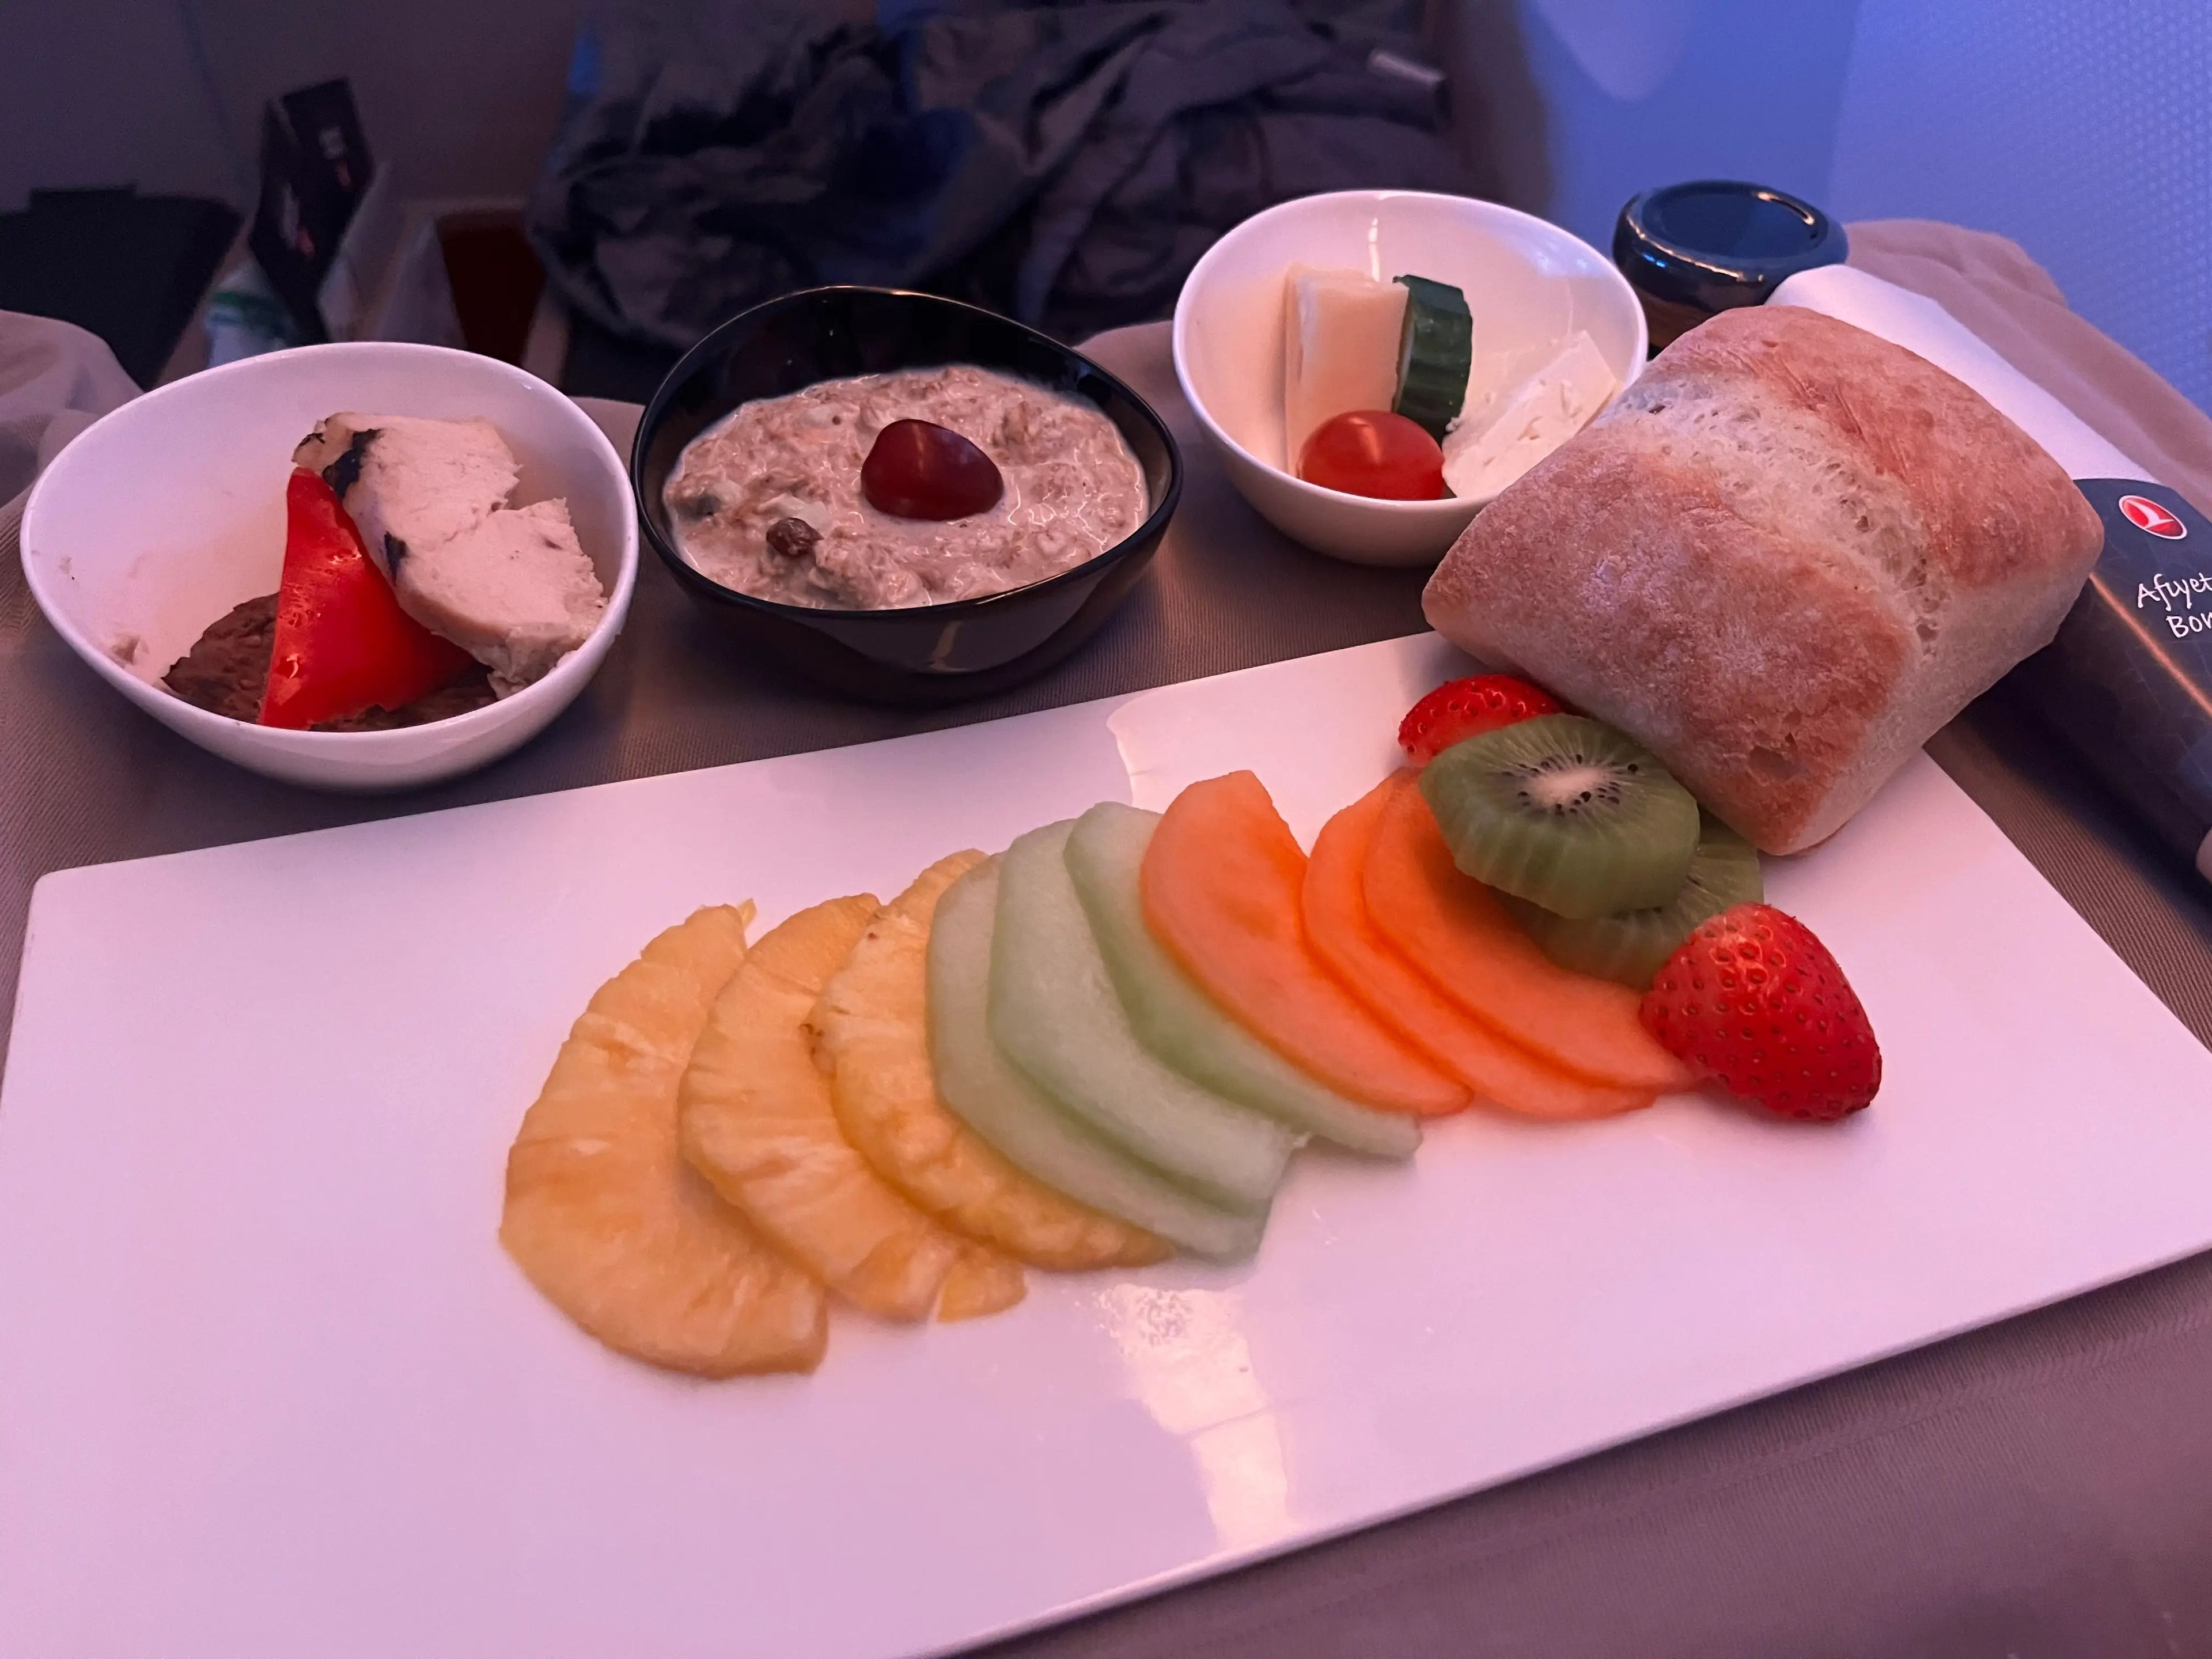 Spread of muesli, slices of kiwi, cantaloupe, melon, pineapple, and strawberry, chicken breast and roast beef, bread, and Turkish cheese with a tomato and cucumber